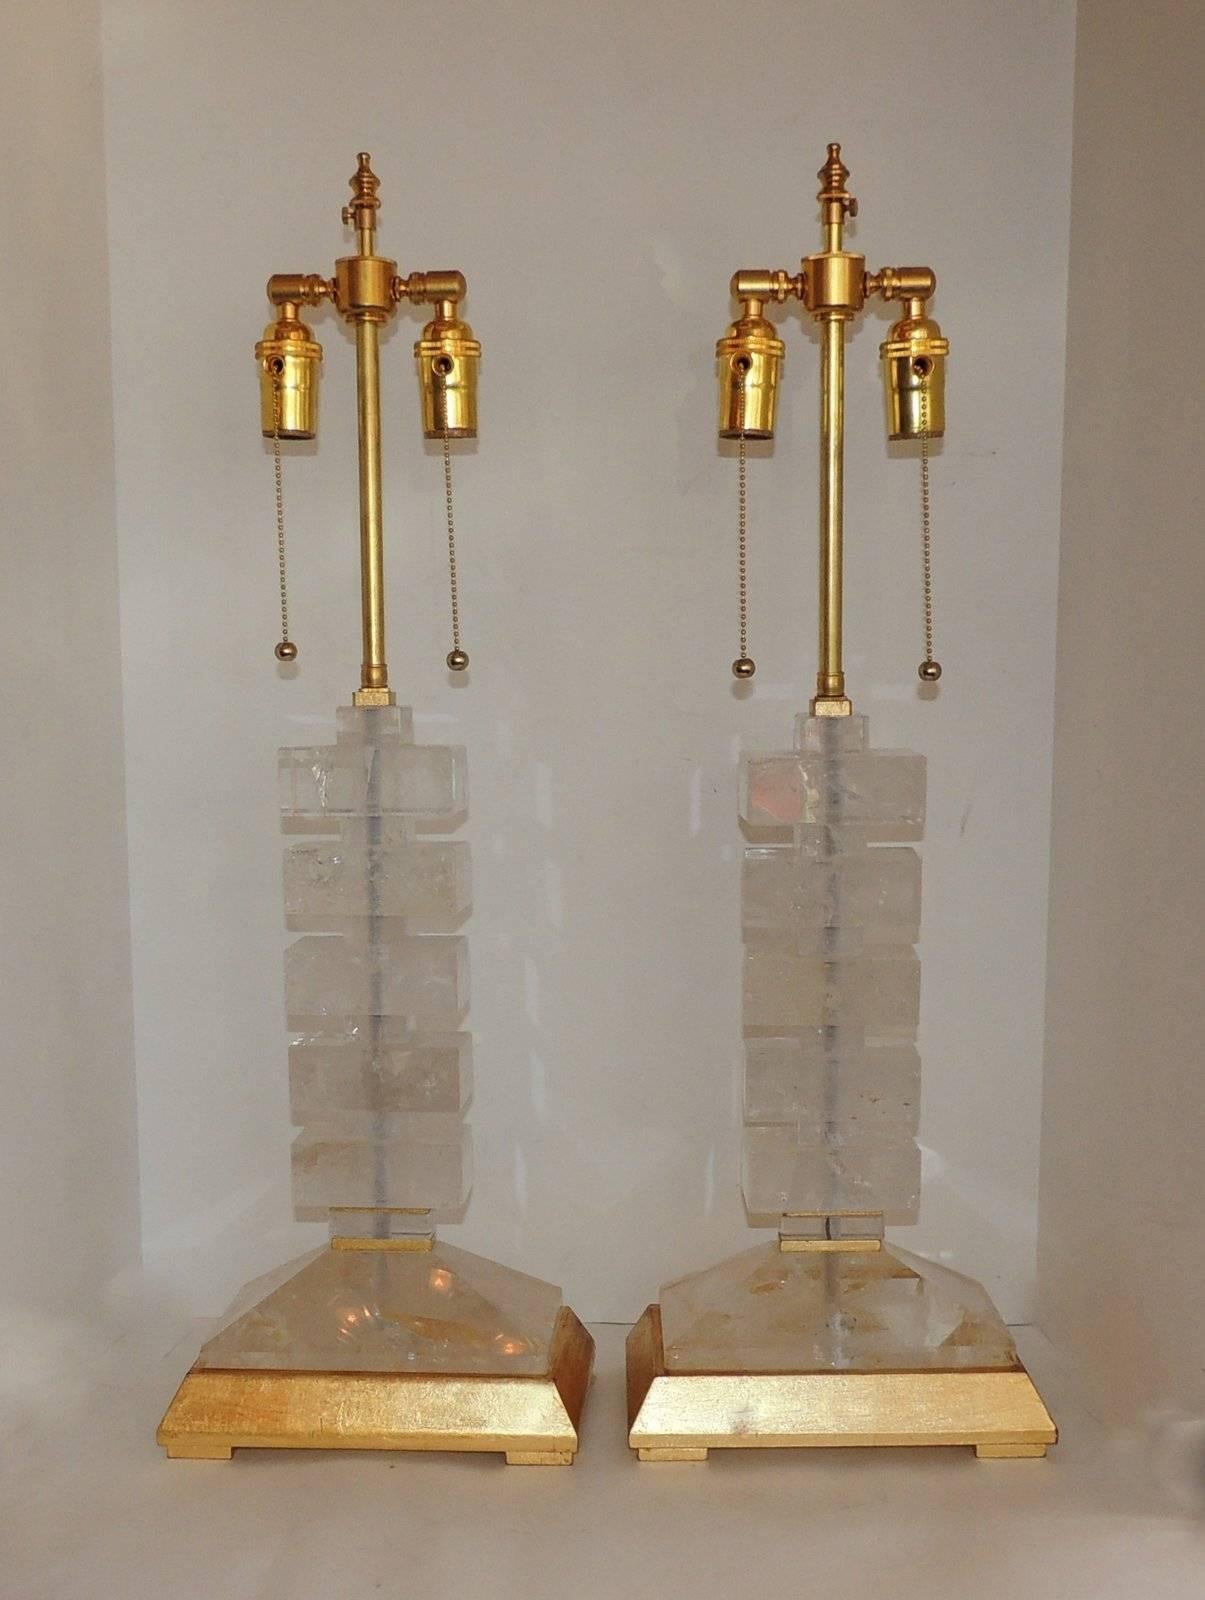 Beautiful pair of modern style stacked rock crystal lamps on gold leaf wood bases.
Measure: 29